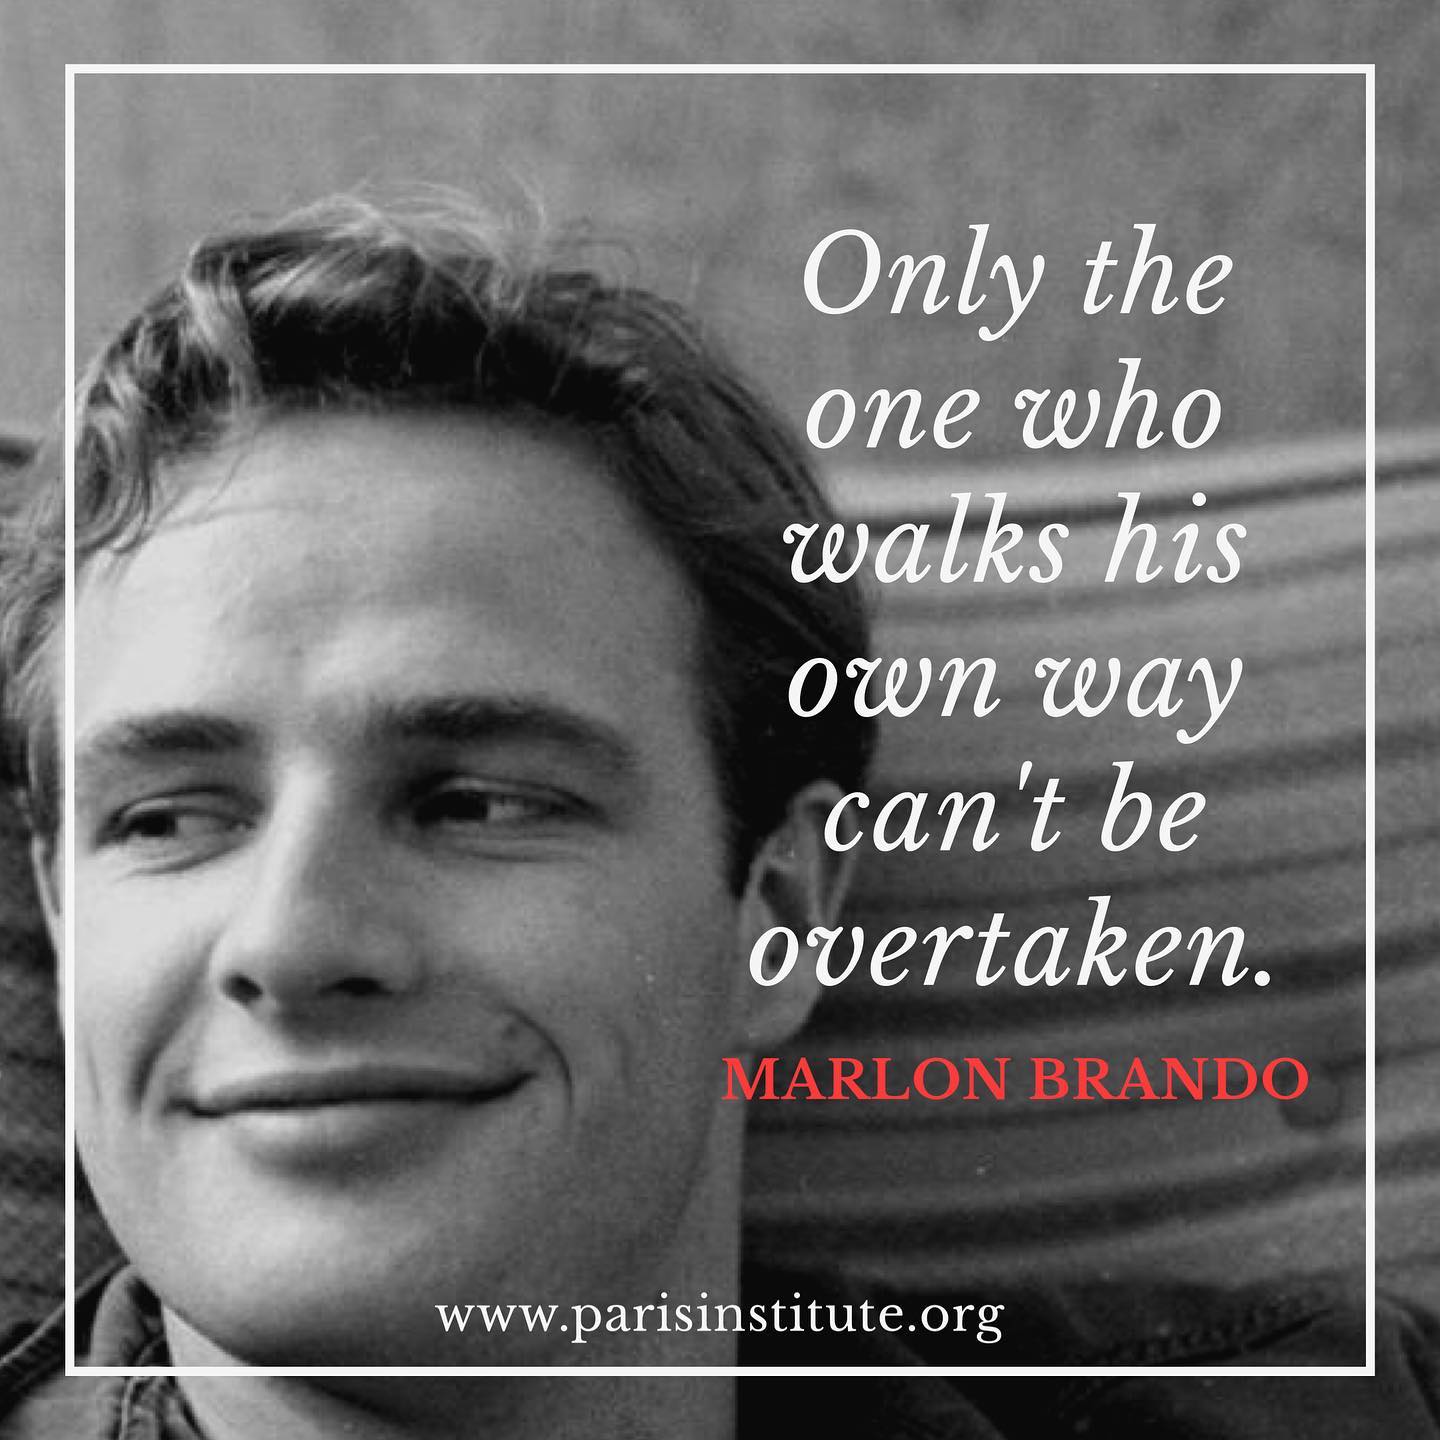 Only the one who walks his own way can’t be overtaken. Marlon Brando